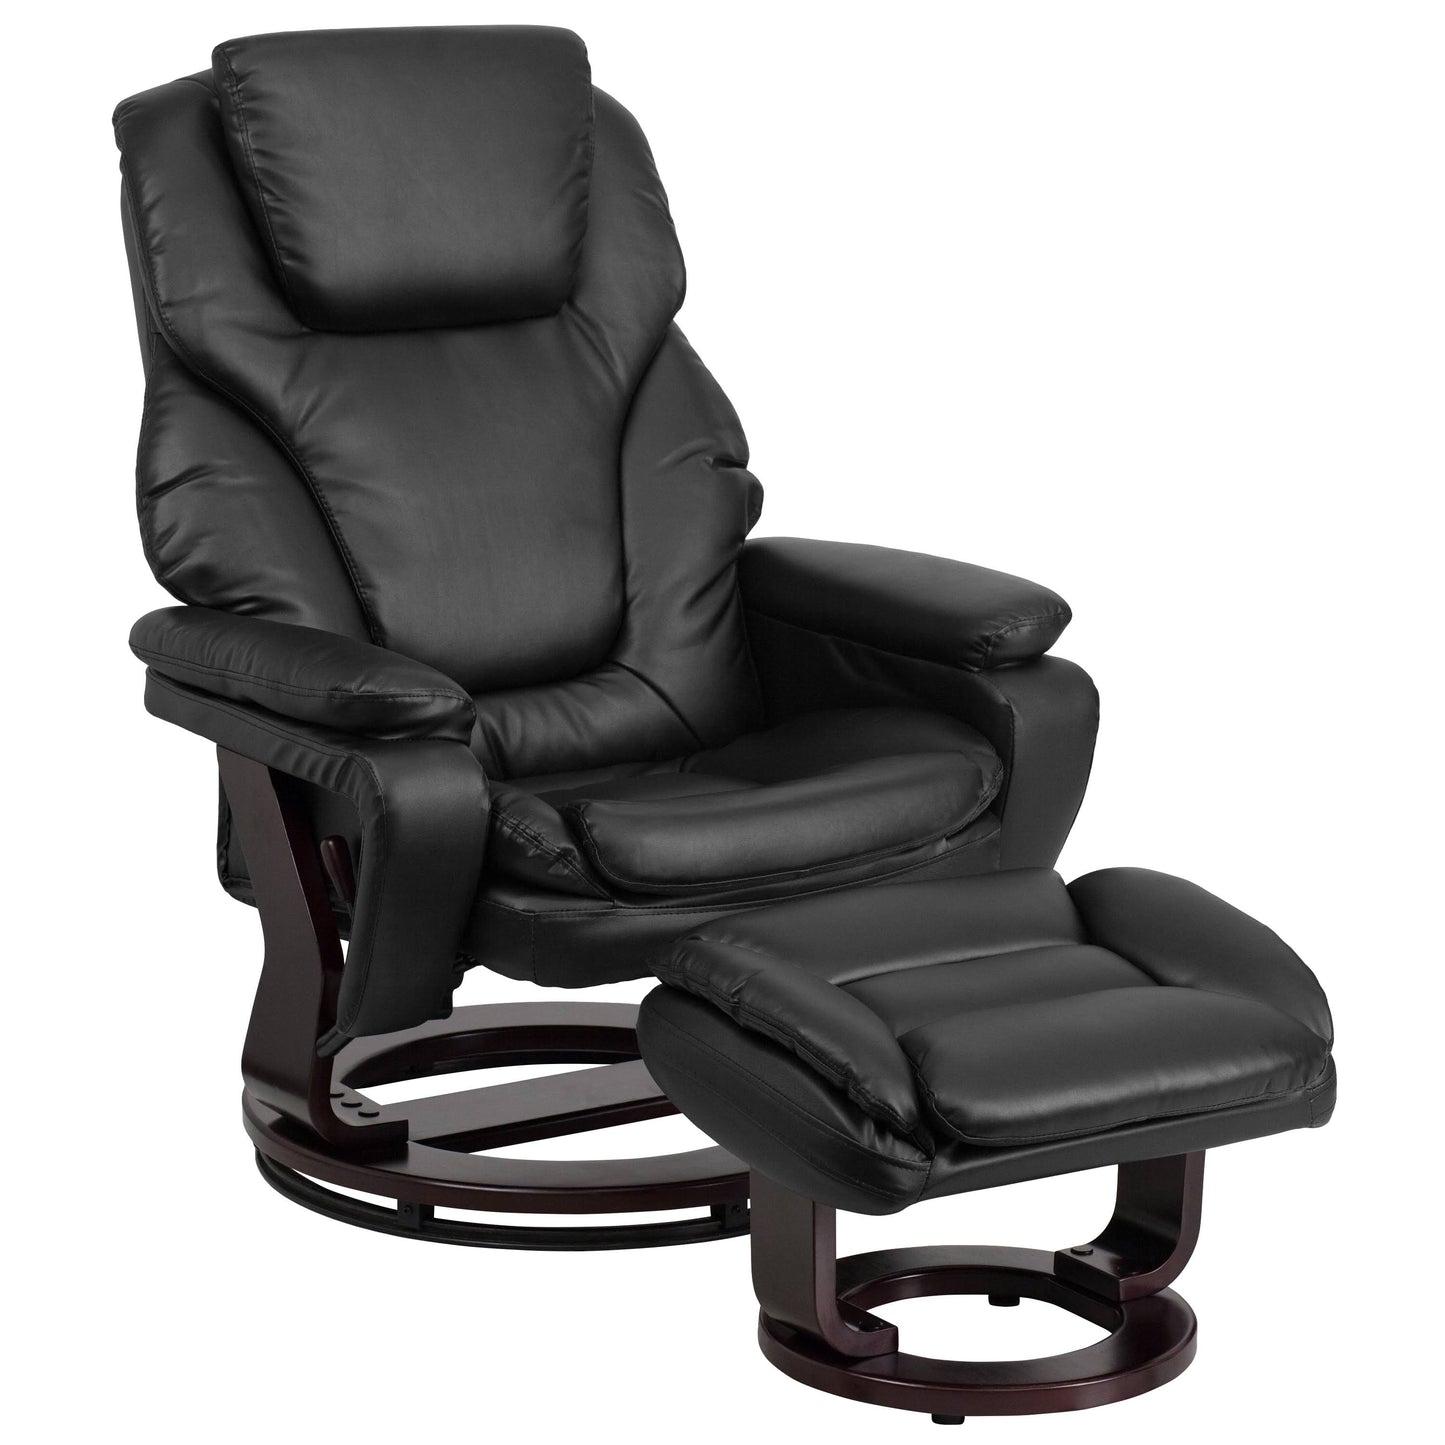 Leather Recliner And Ottoman With Swiveling Mahogany Wood Base, Black